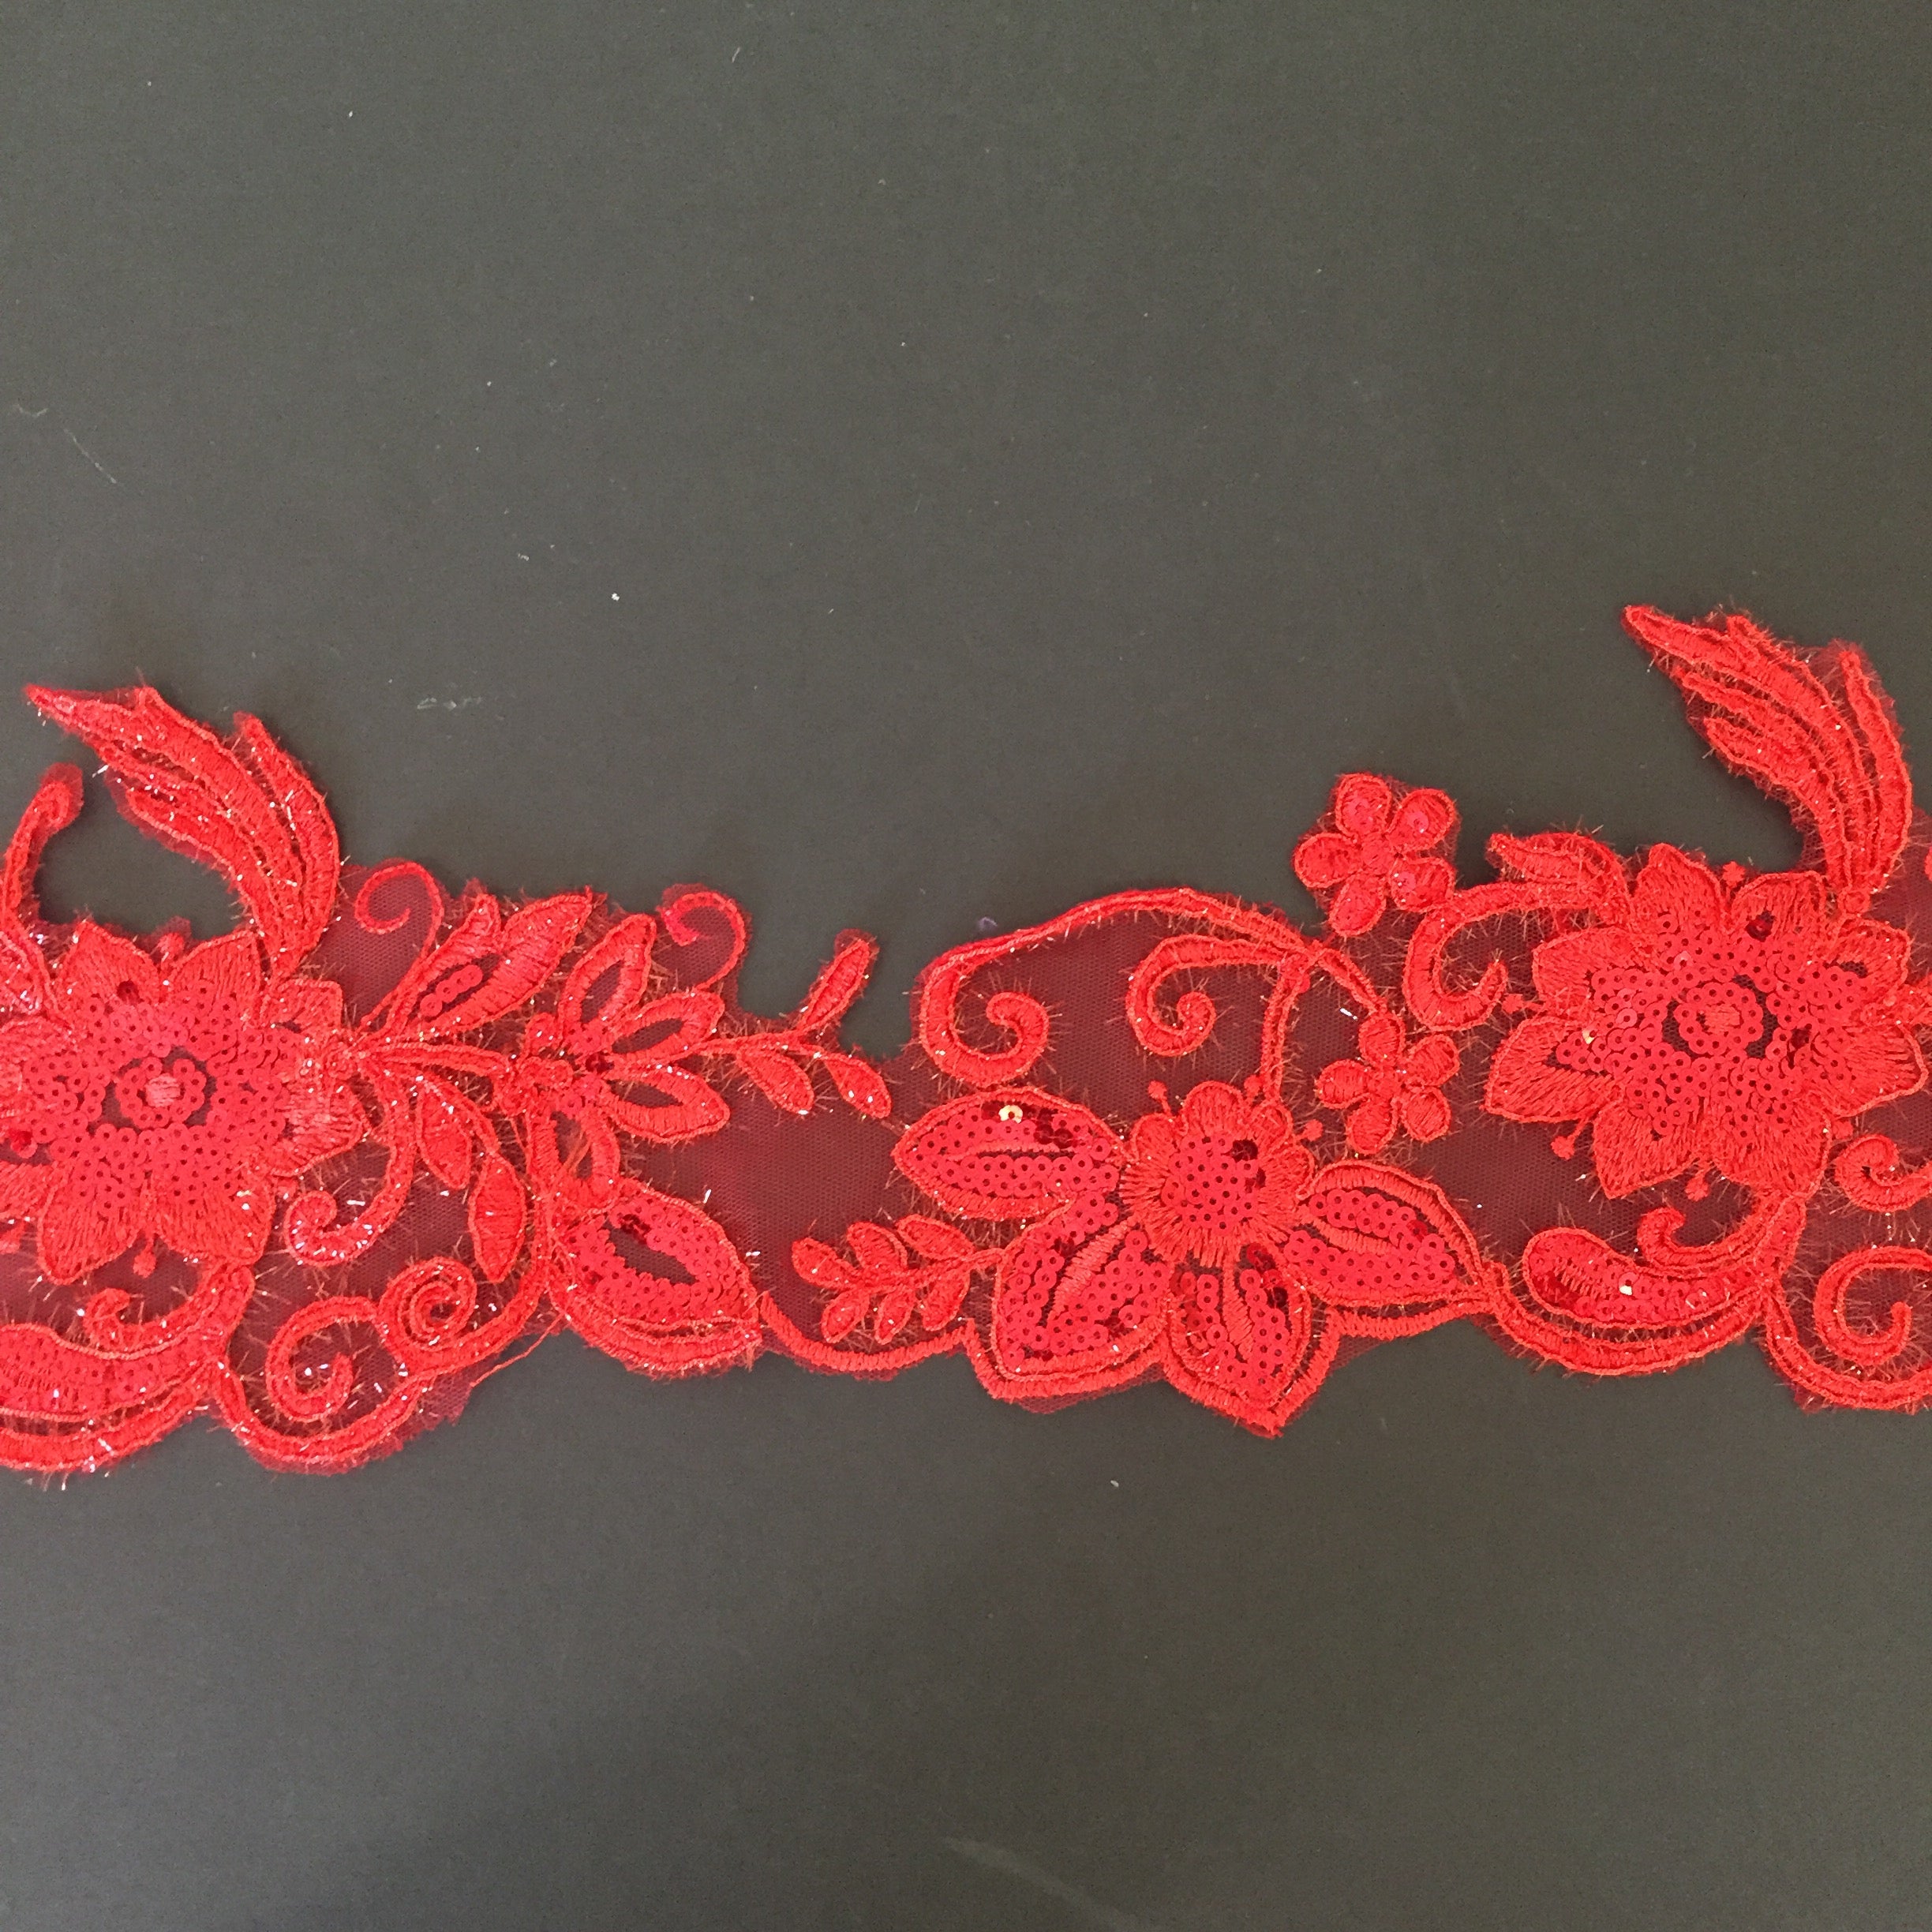 Red lace border with floral pattern and embellished with red sequins on flower centres and leaves.  Embroidered with glittery thread which sparkles under the light.